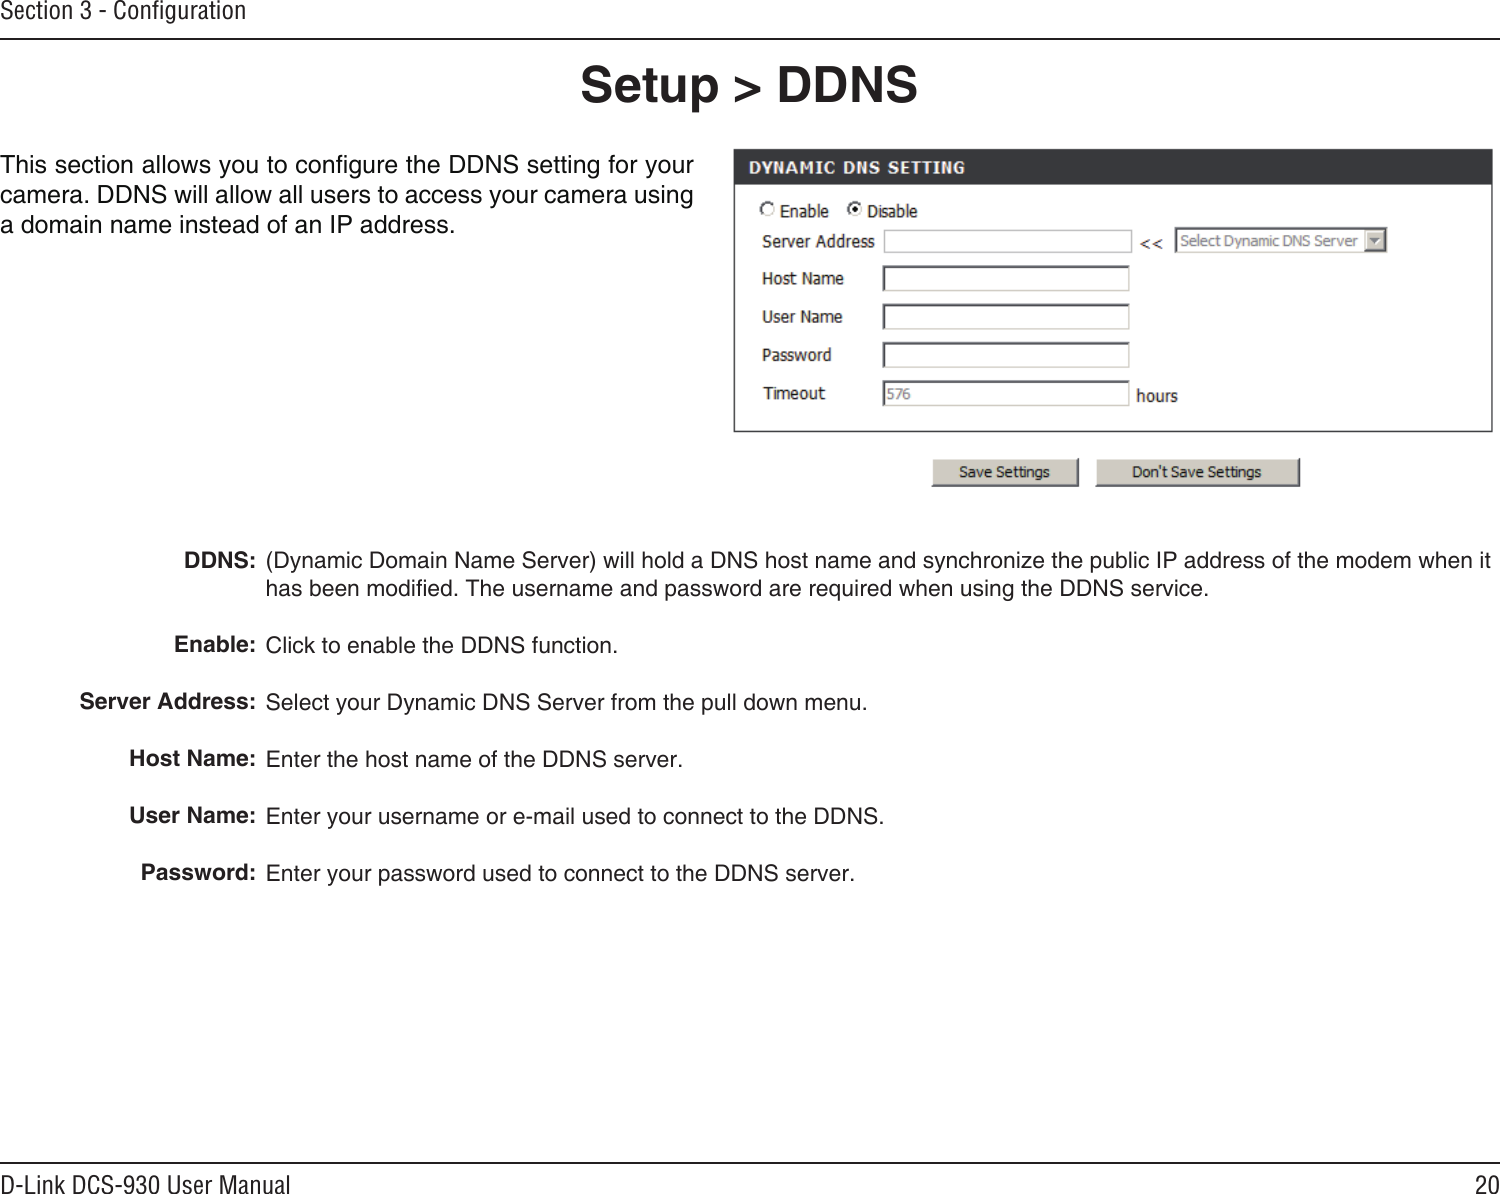 20D-Link DCS-930 User ManualSection 3 - Conﬁguration(Dynamic Domain Name Server) will hold a DNS host name and synchronize the public IP address of the modem when it has been modied. The username and password are required when using the DDNS service.Click to enable the DDNS function.Select your Dynamic DNS Server from the pull down menu.Enter the host name of the DDNS server.Enter your username or e-mail used to connect to the DDNS.Enter your password used to connect to the DDNS server.DDNS: Enable:Server Address: Host Name:User Name:Password:Setup &gt; DDNS This section allows you to congure the DDNS setting for your camera. DDNS will allow all users to access your camera using a domain name instead of an IP address.